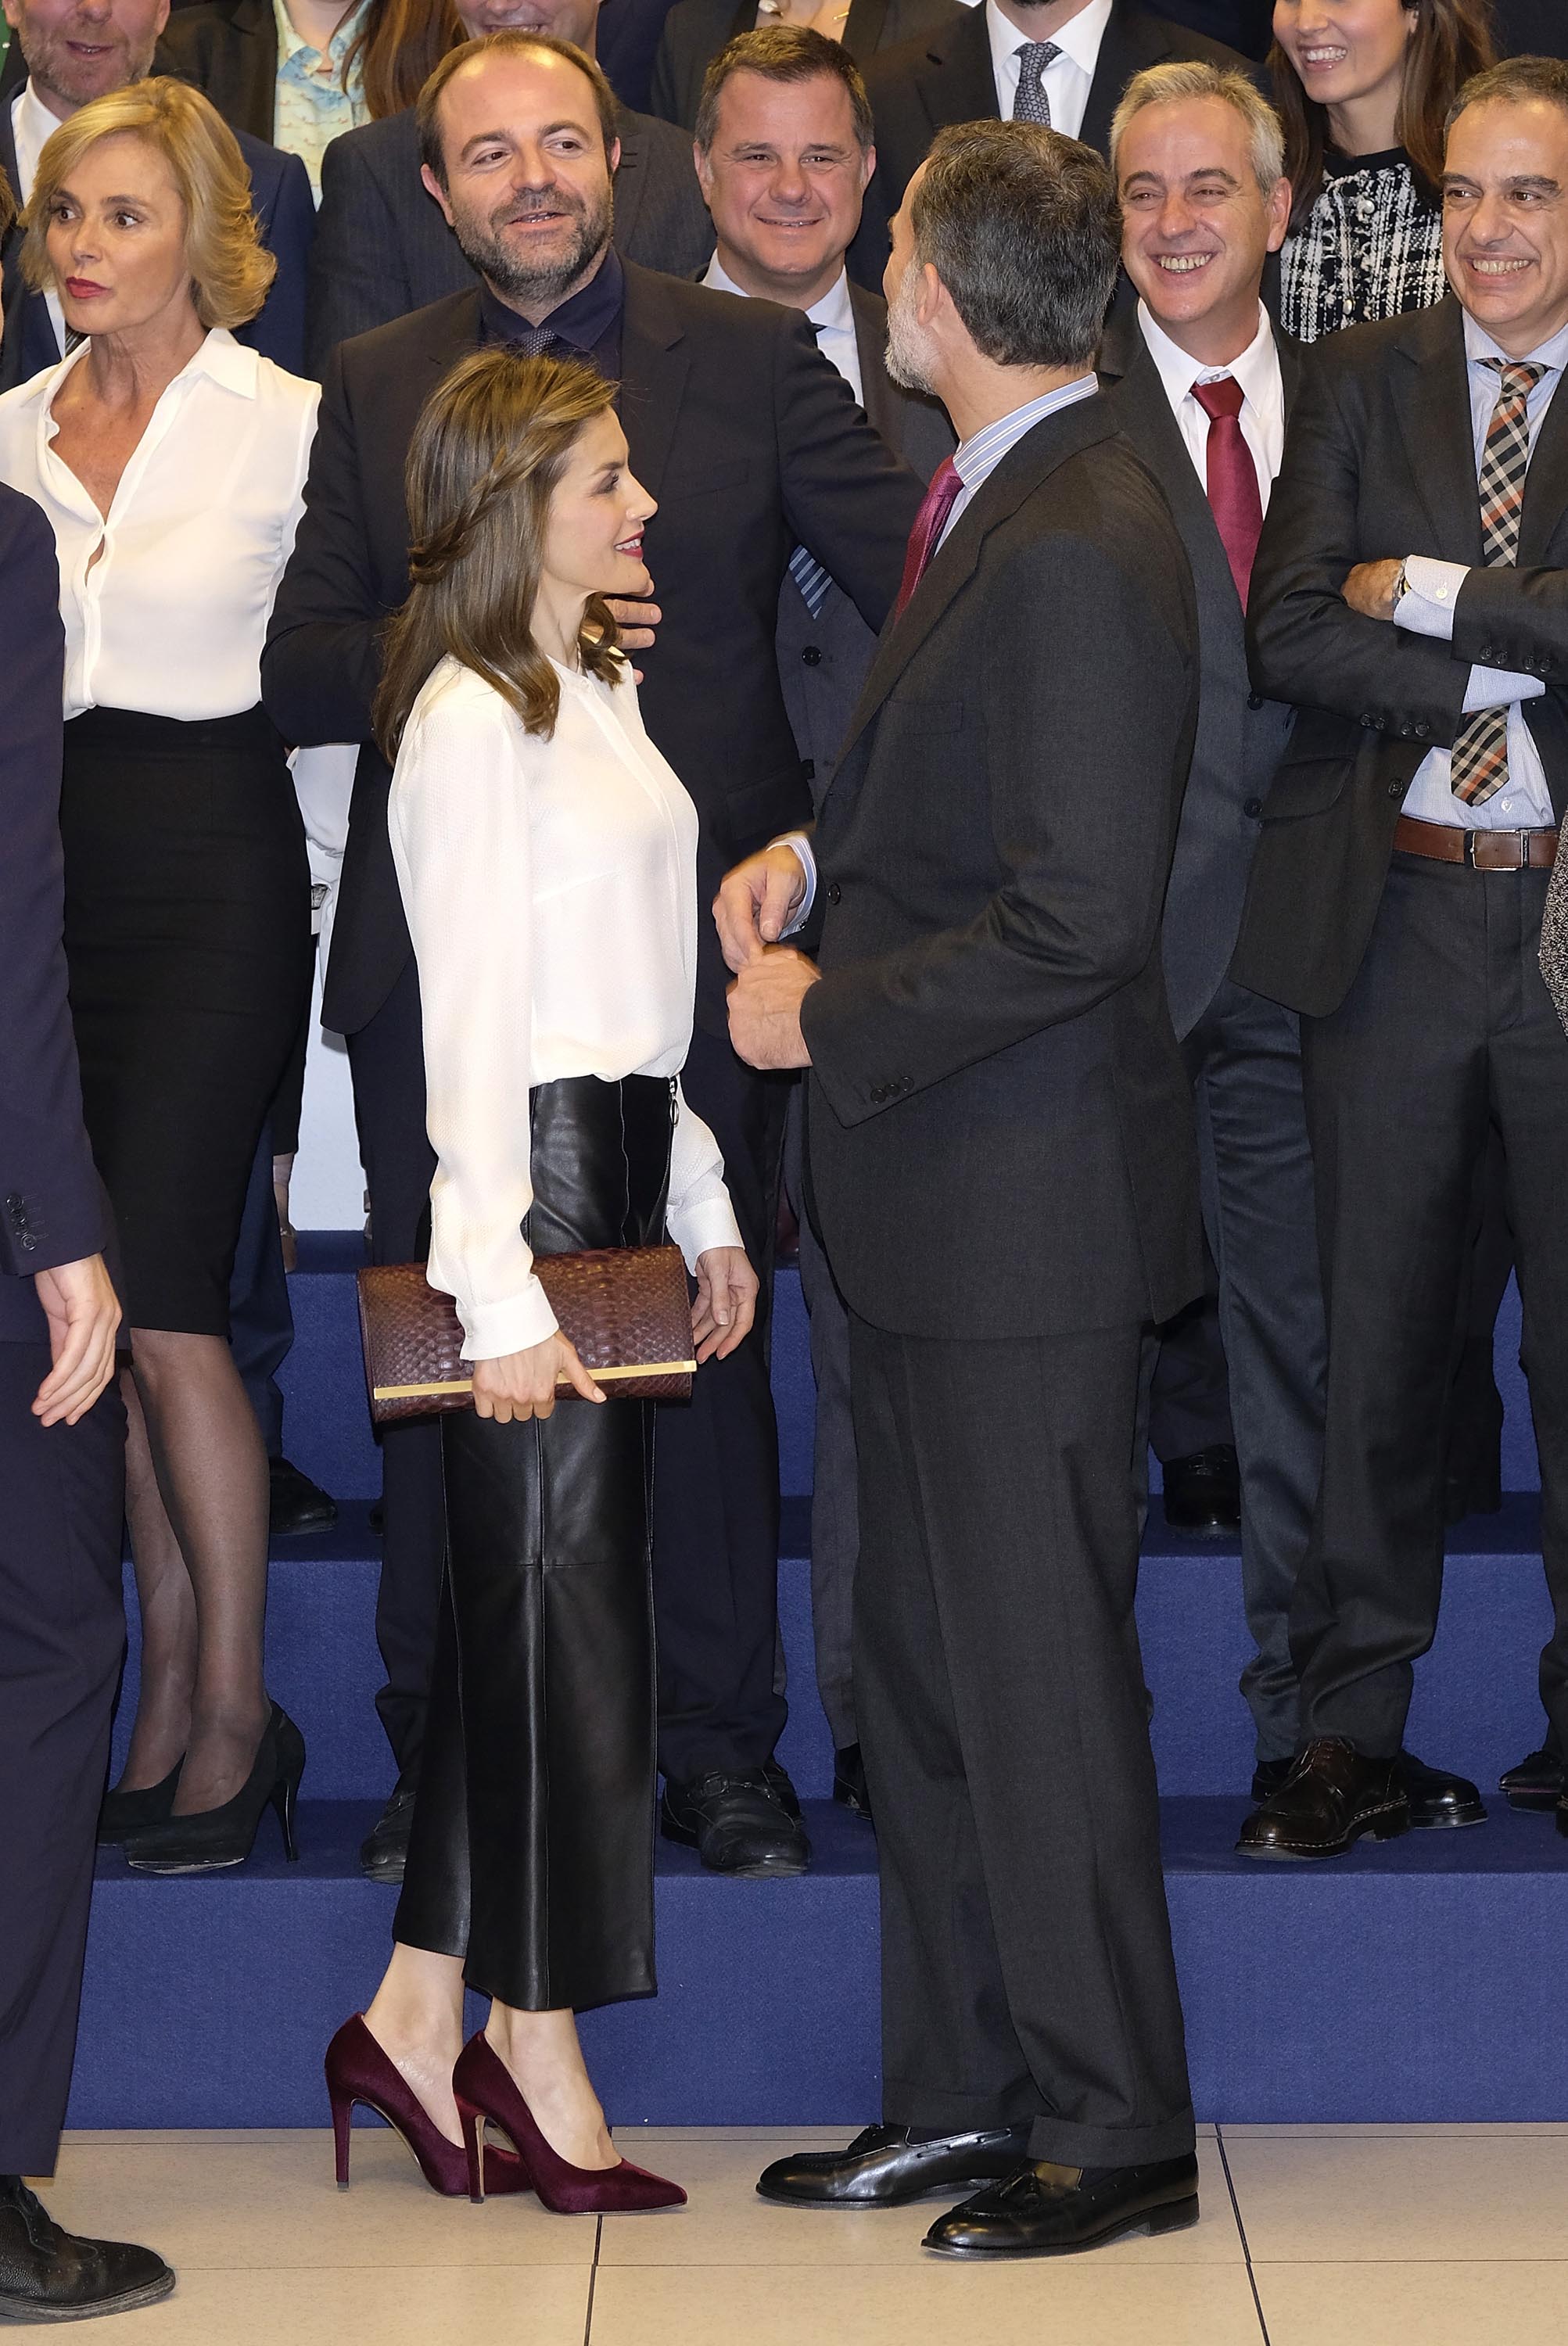 Queen Letizia of Spain visits Zeta Group on its 40th anniversary